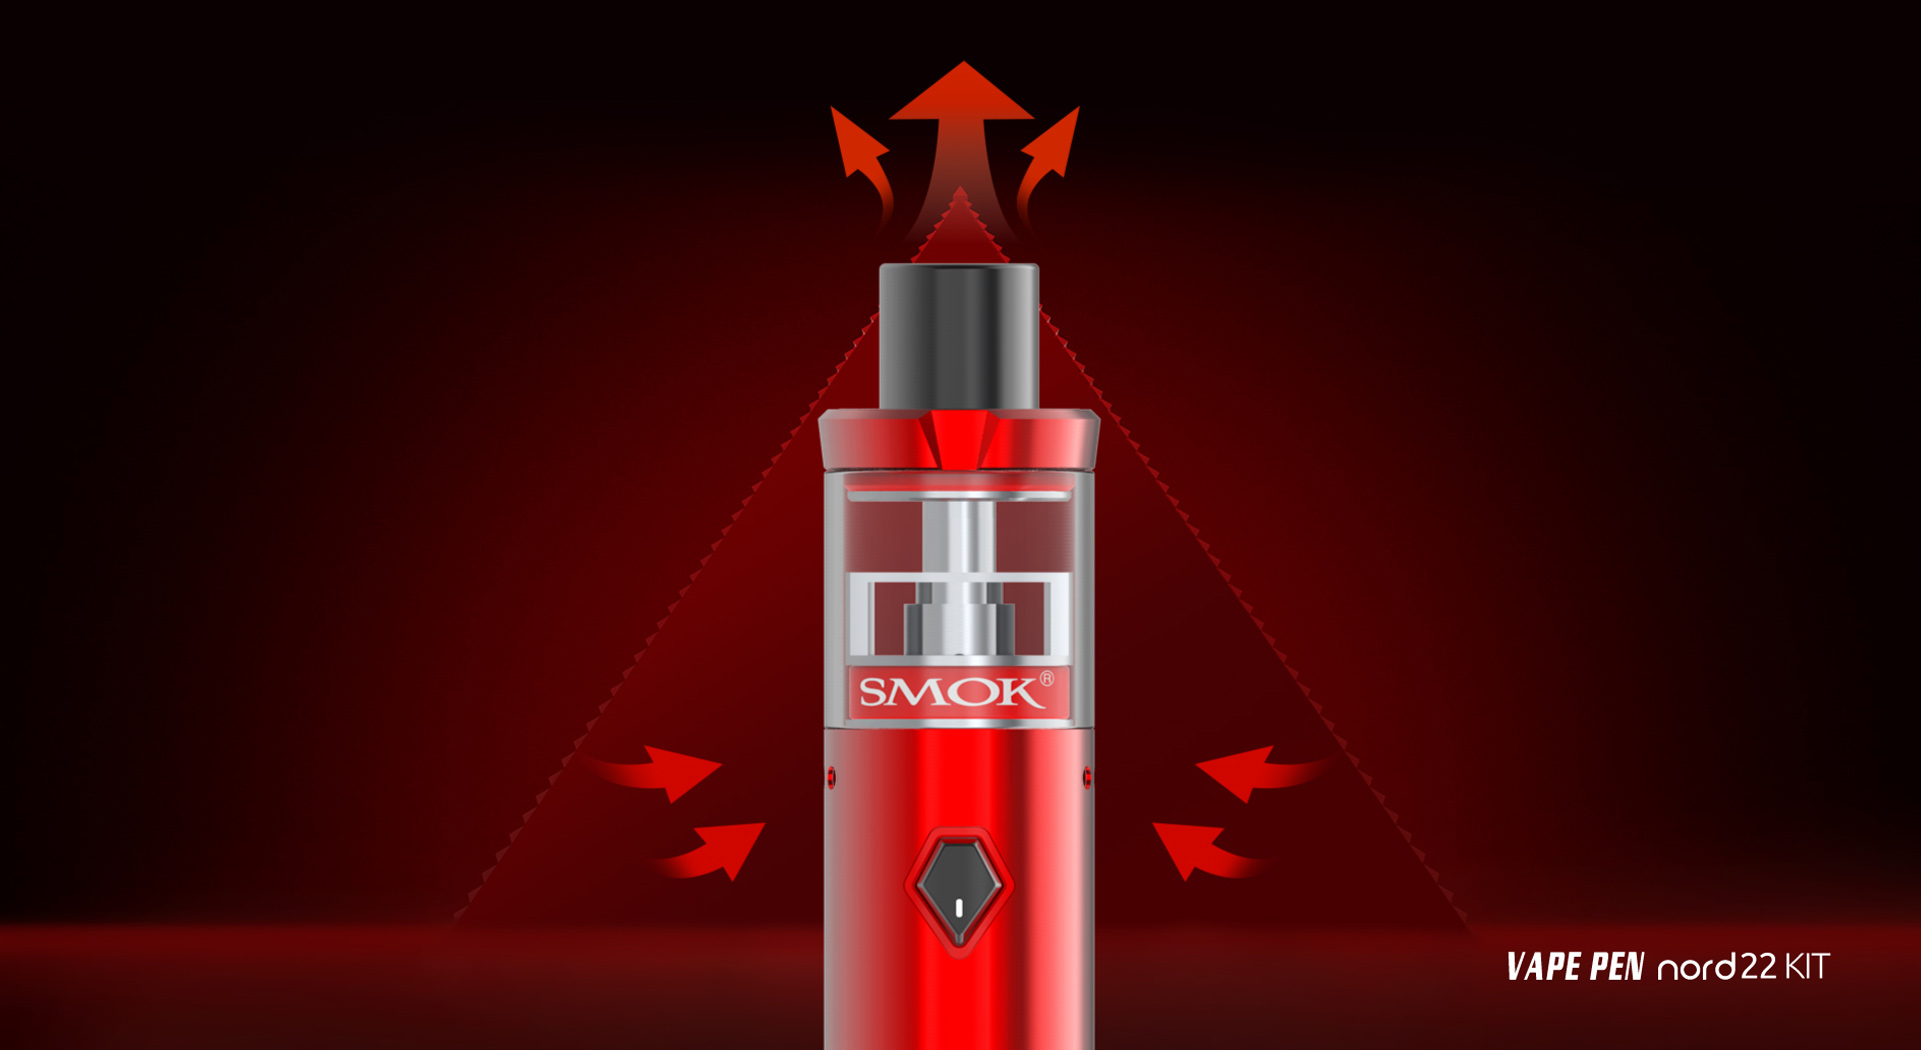 SMOK Vape Pen Nord 19&22 with Two Air Slots Balanced Airflow